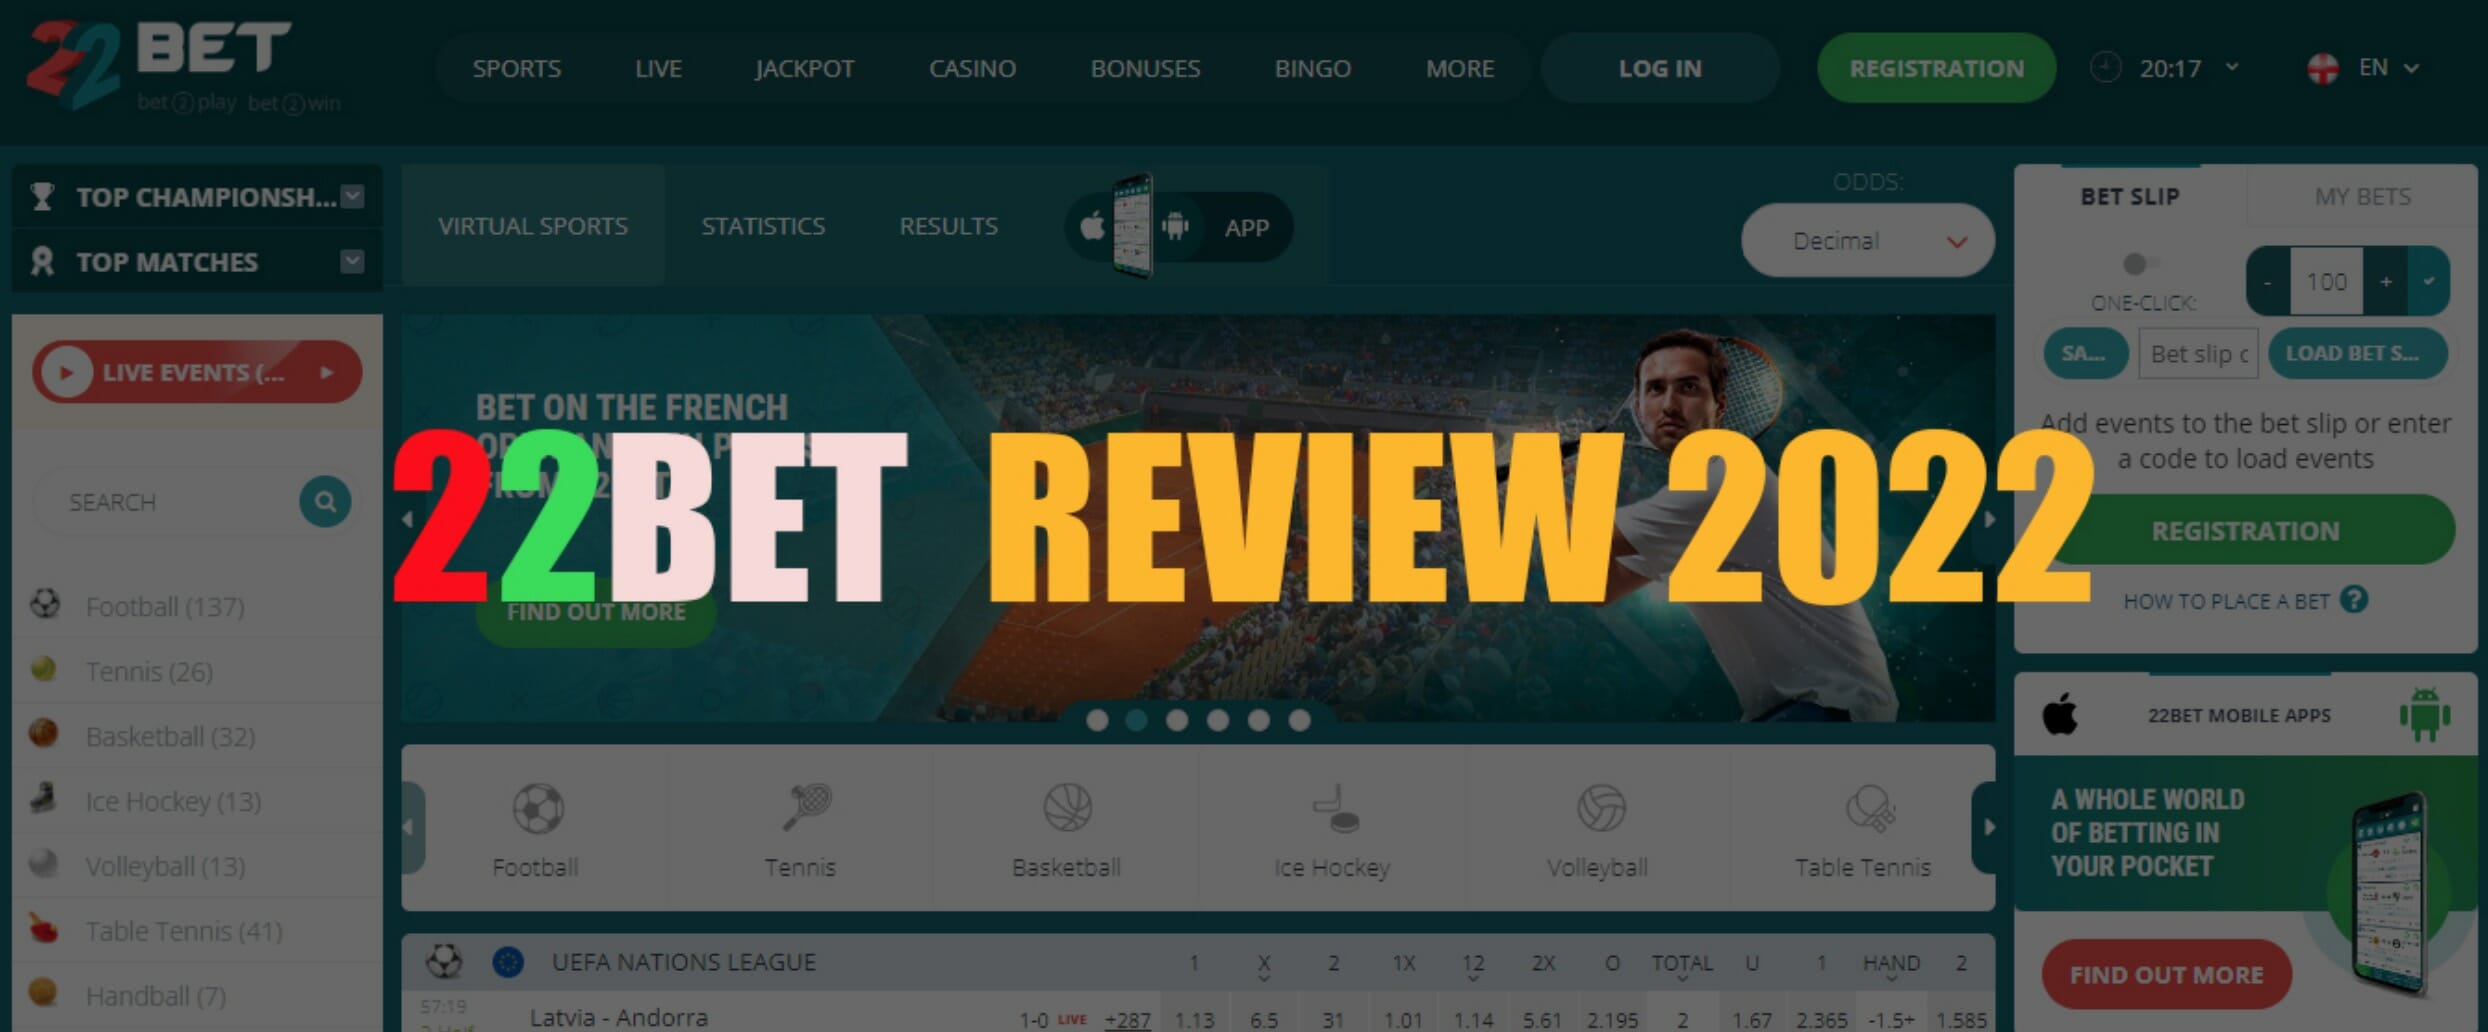 sports betting Thailand Shortcuts - The Easy Way